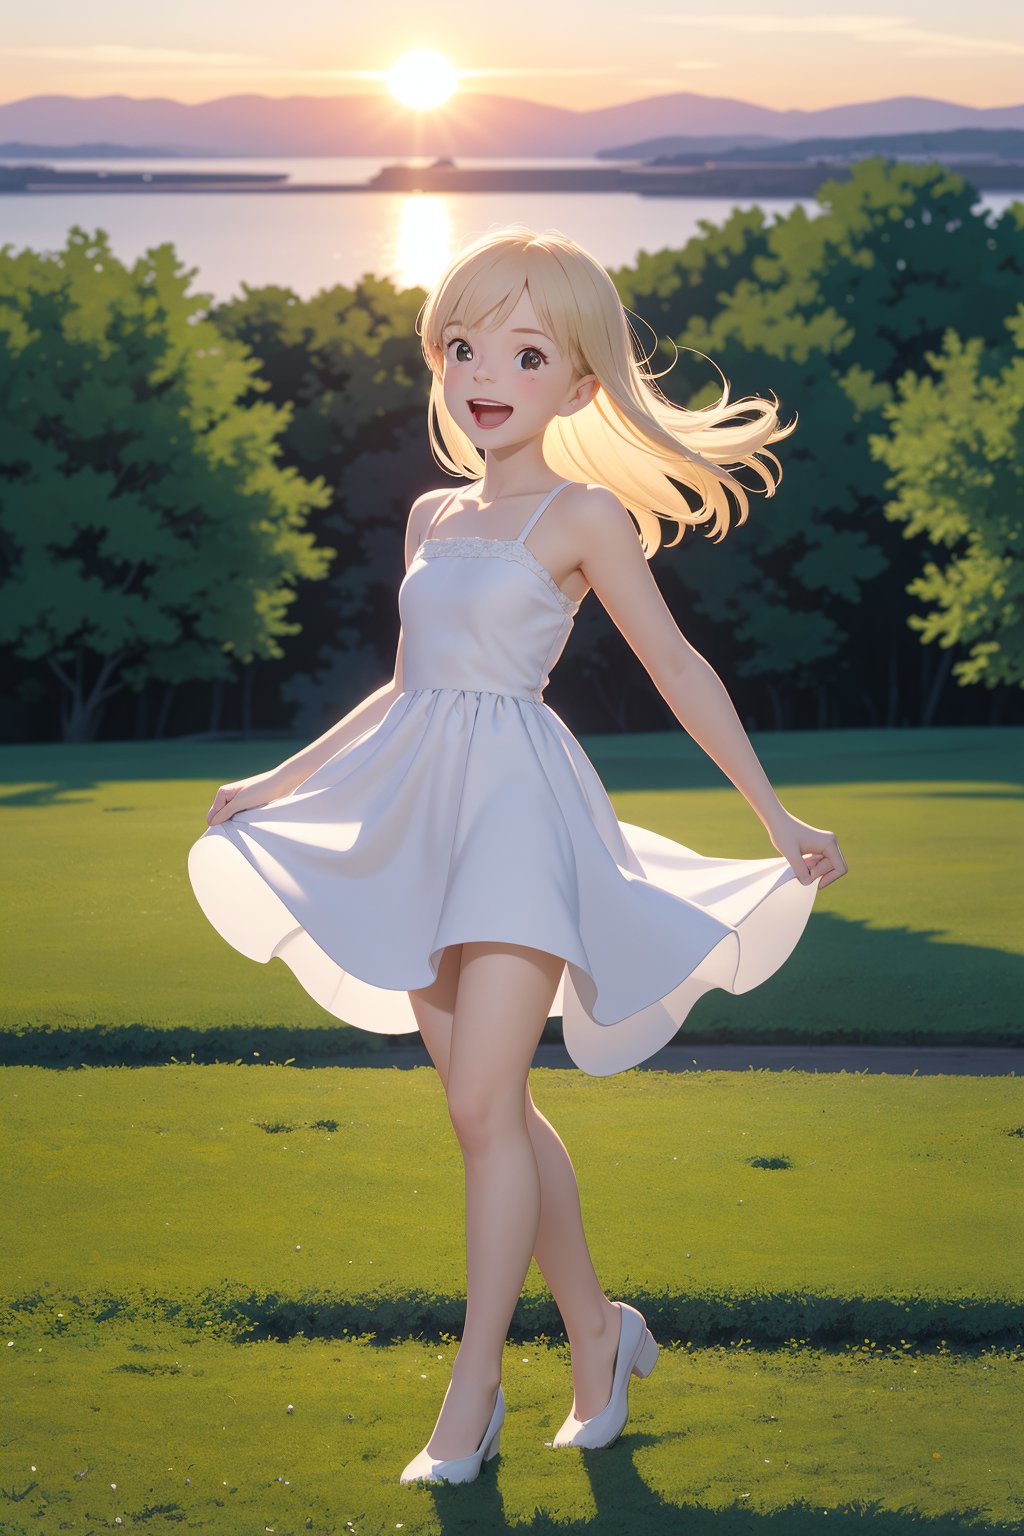 score_9, score_8_up, score_7_up, source_real, pretty young girl, tiny,  long blond_hair, wearing a cute light white dress, a little reaveling, happy, visibly_happy, at the park, sunset, full_body, 